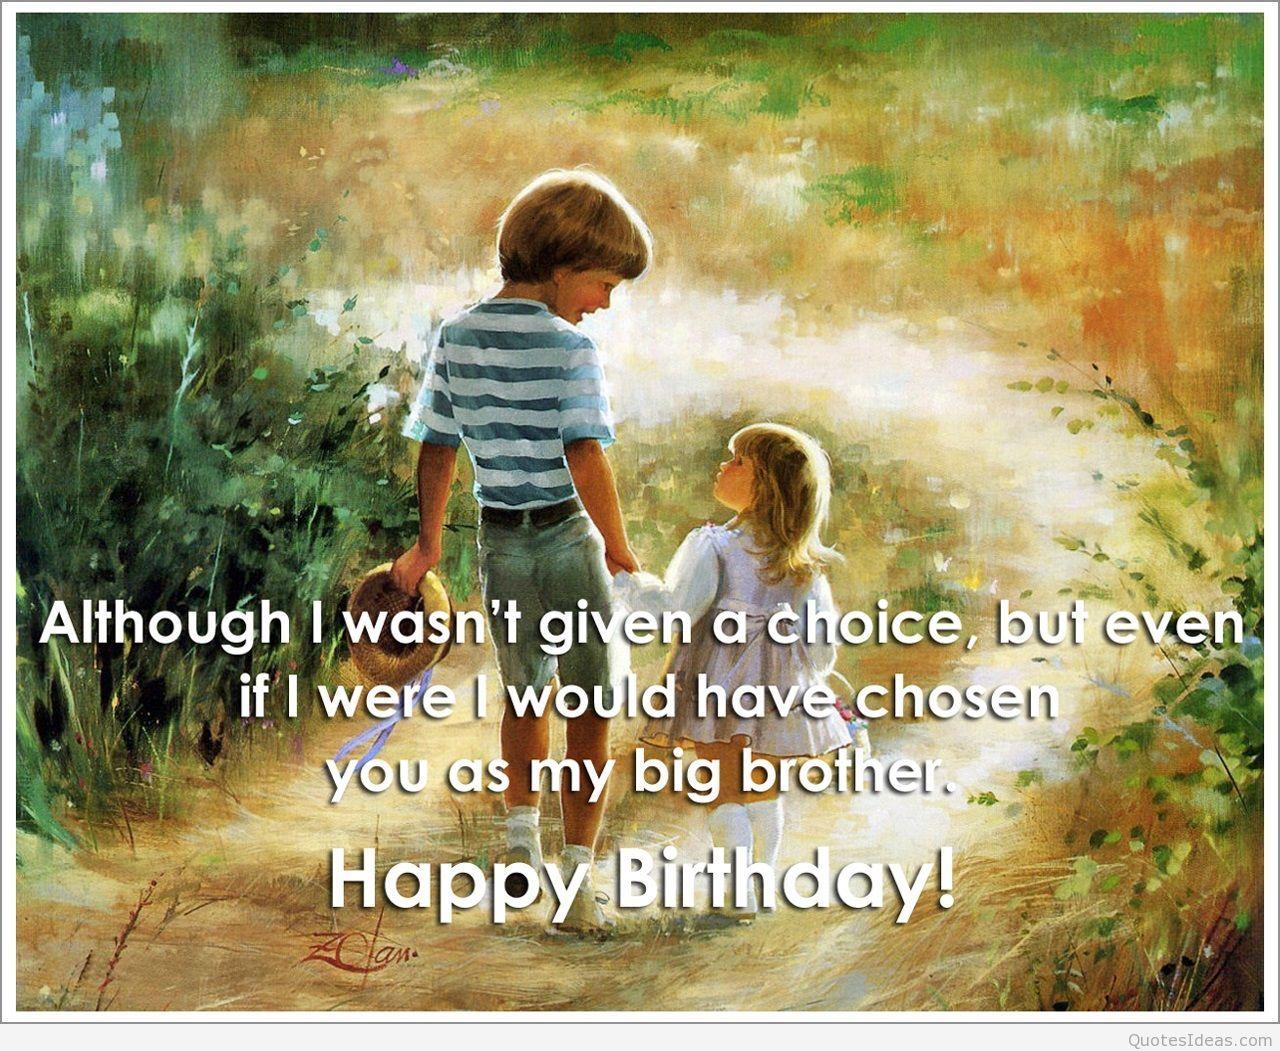 Happy birthday my brothers with wallpaper image HD top